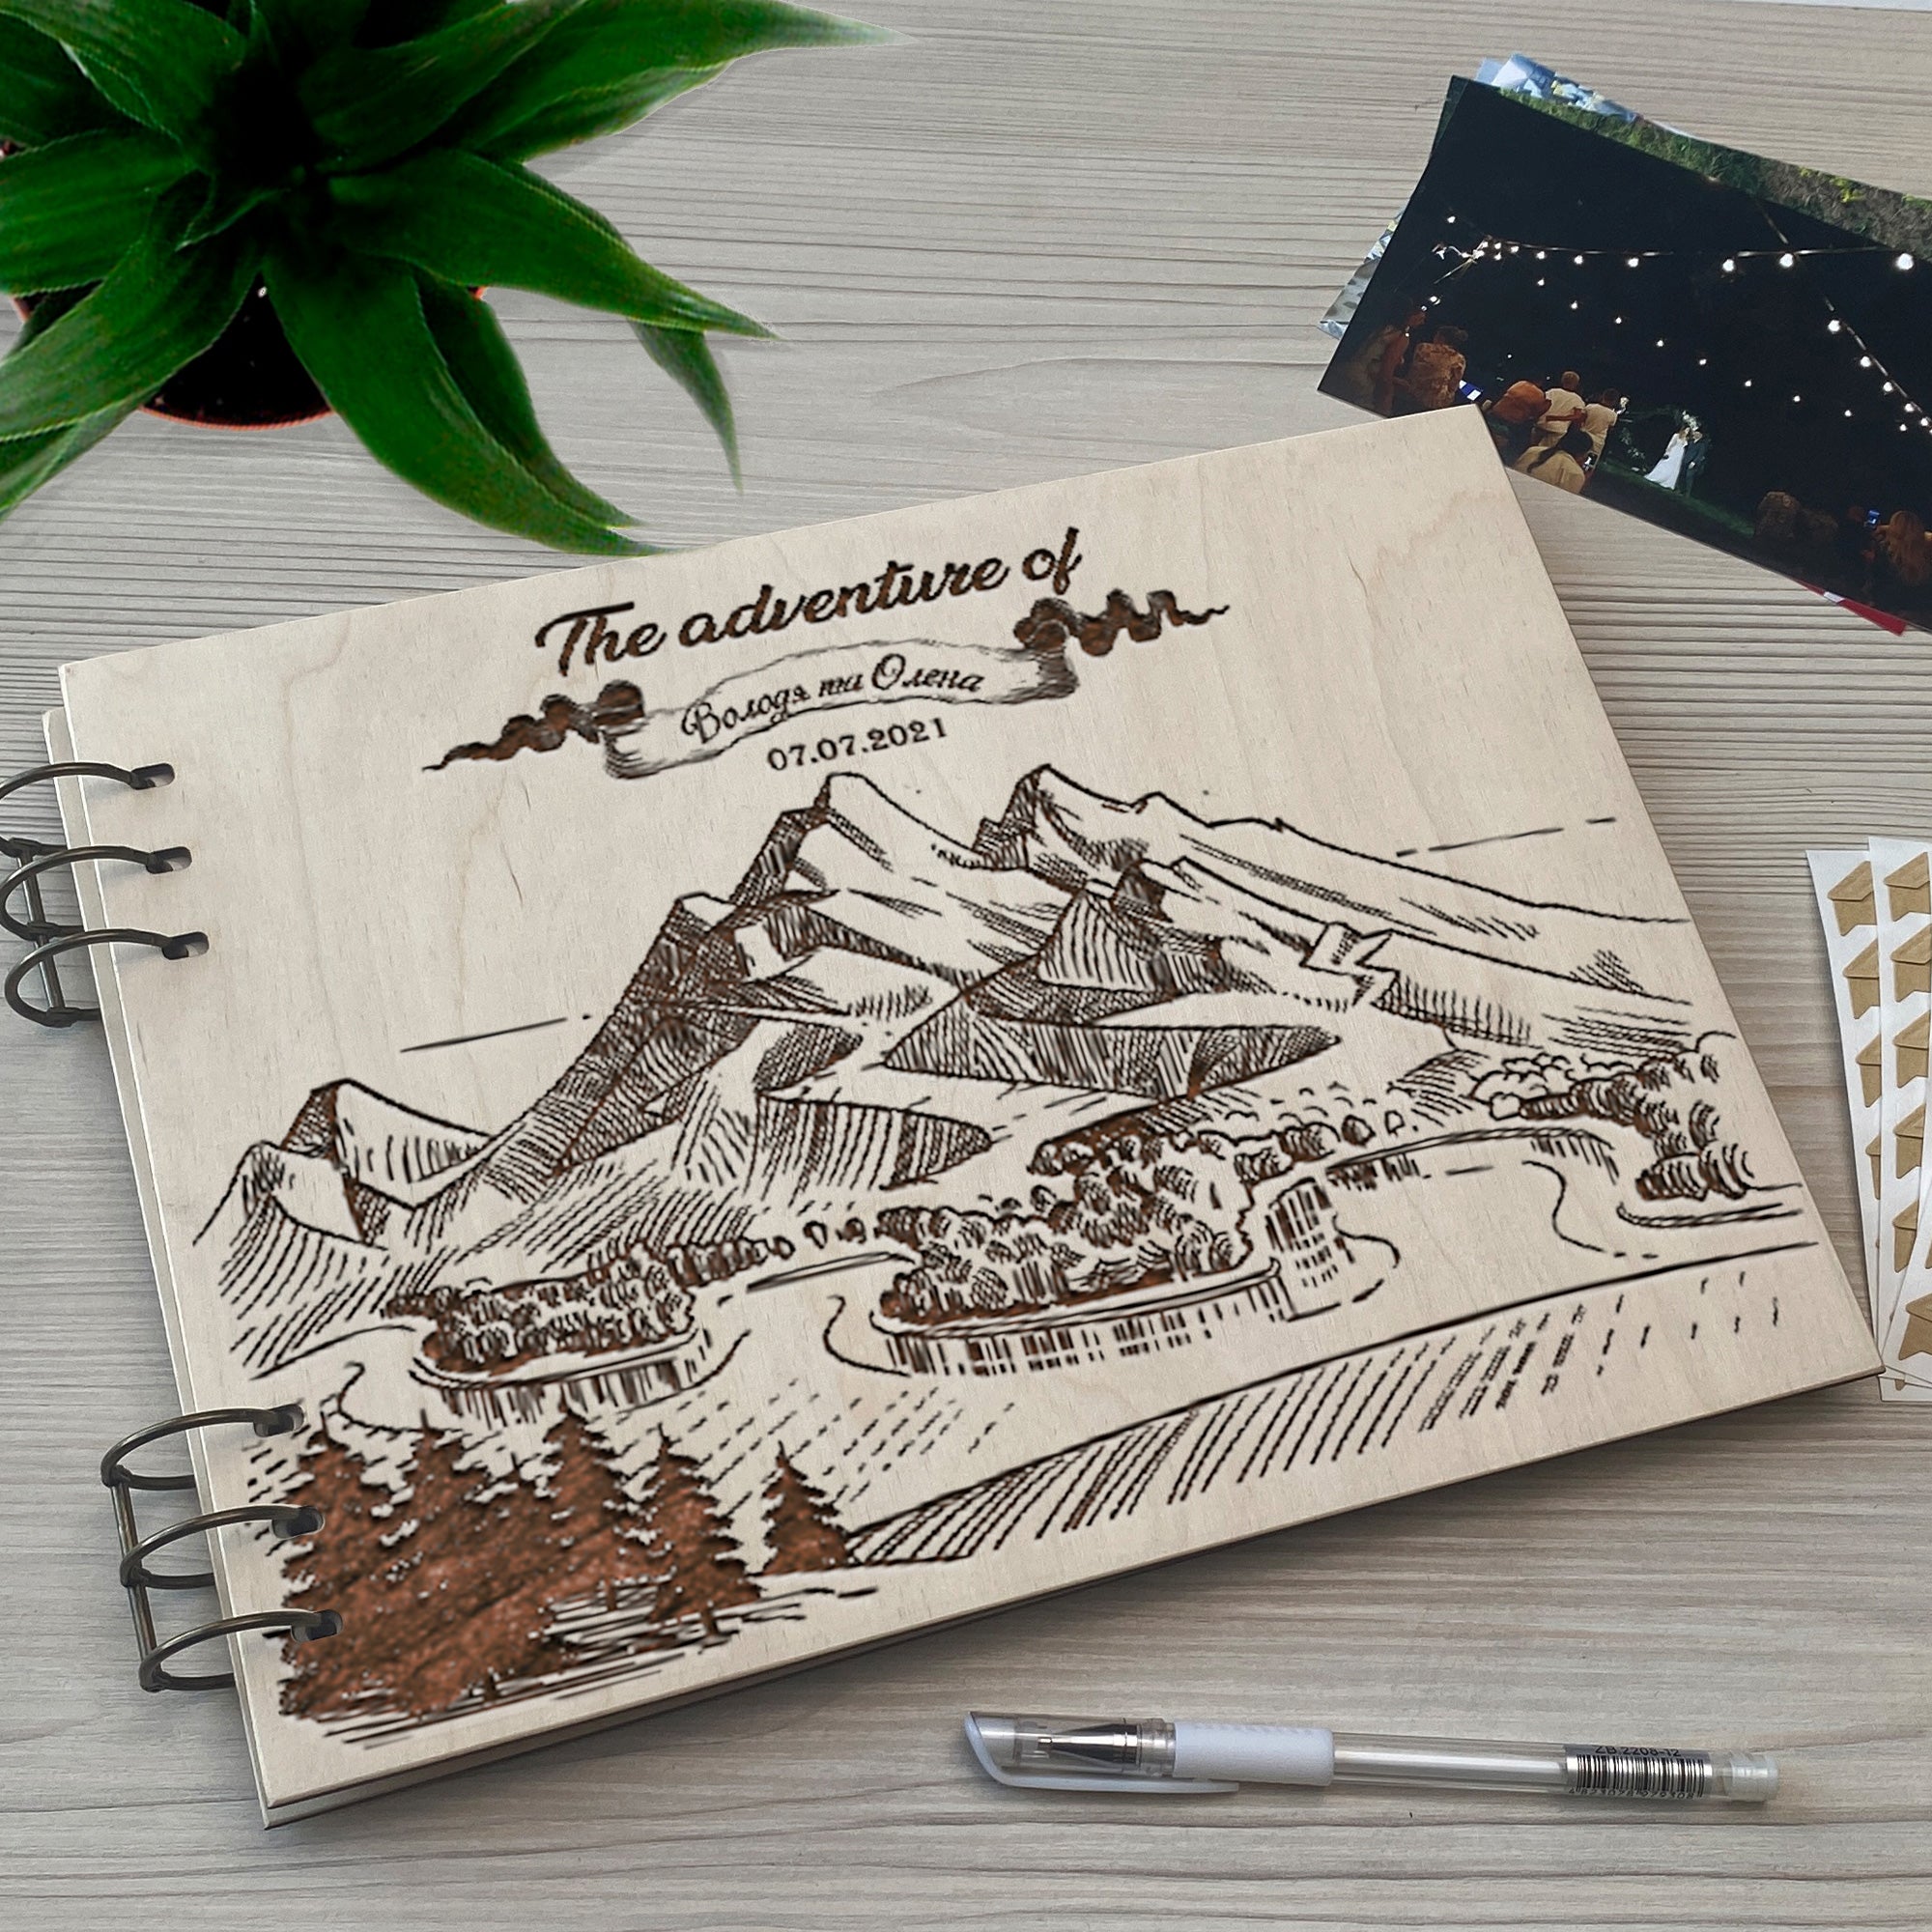 Personalized photo album cover and Mountain engraving